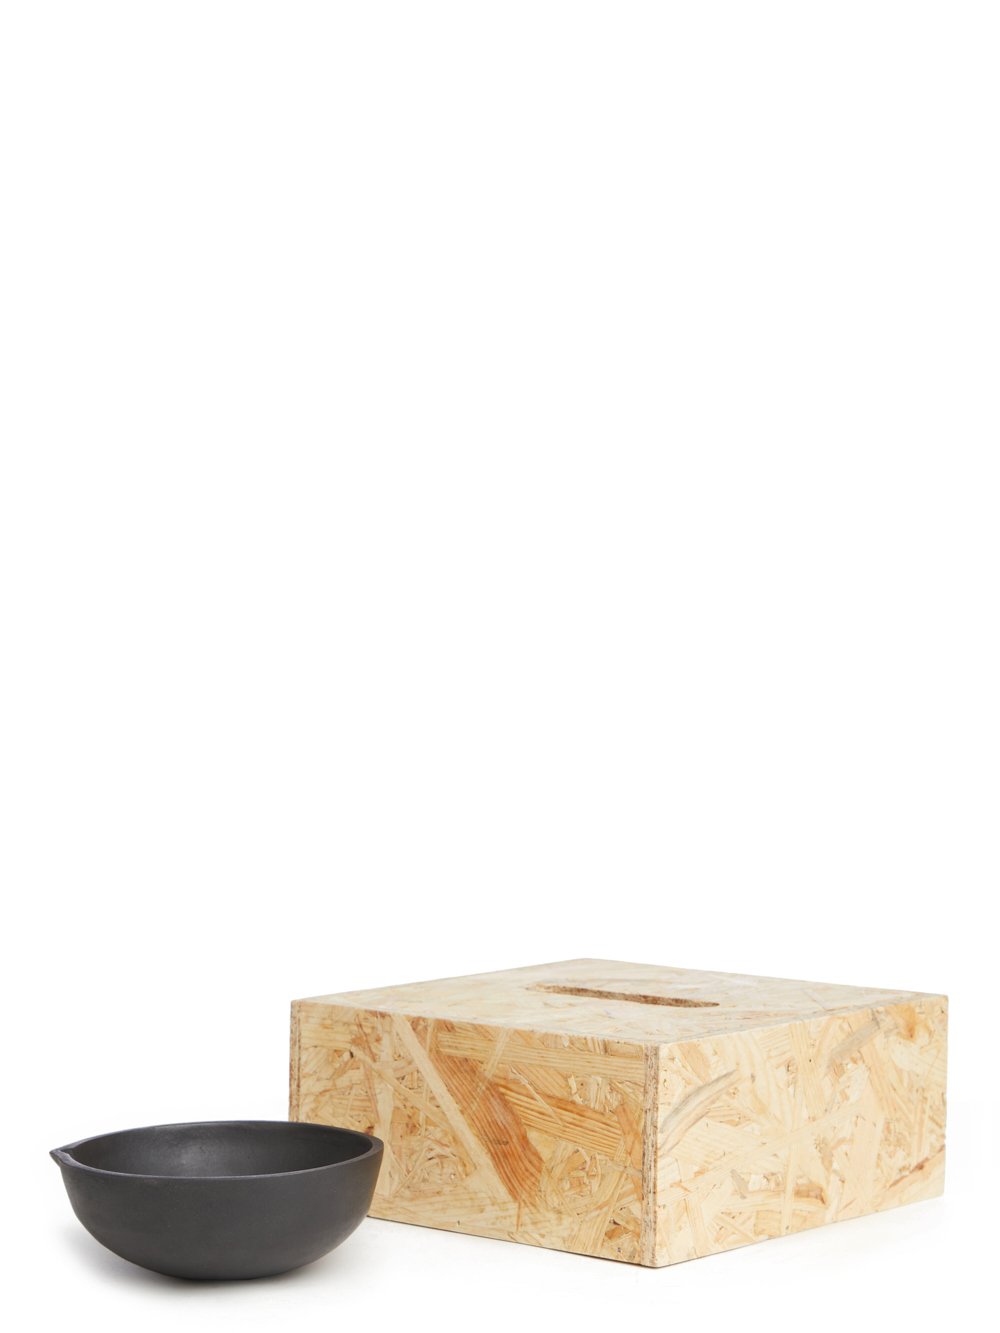 RICK OWENS BOWL HAS A ROUND SHAPE AND FEATURES A SMALL TRIANGLE DETAIL AND POLISHED SURFACE.